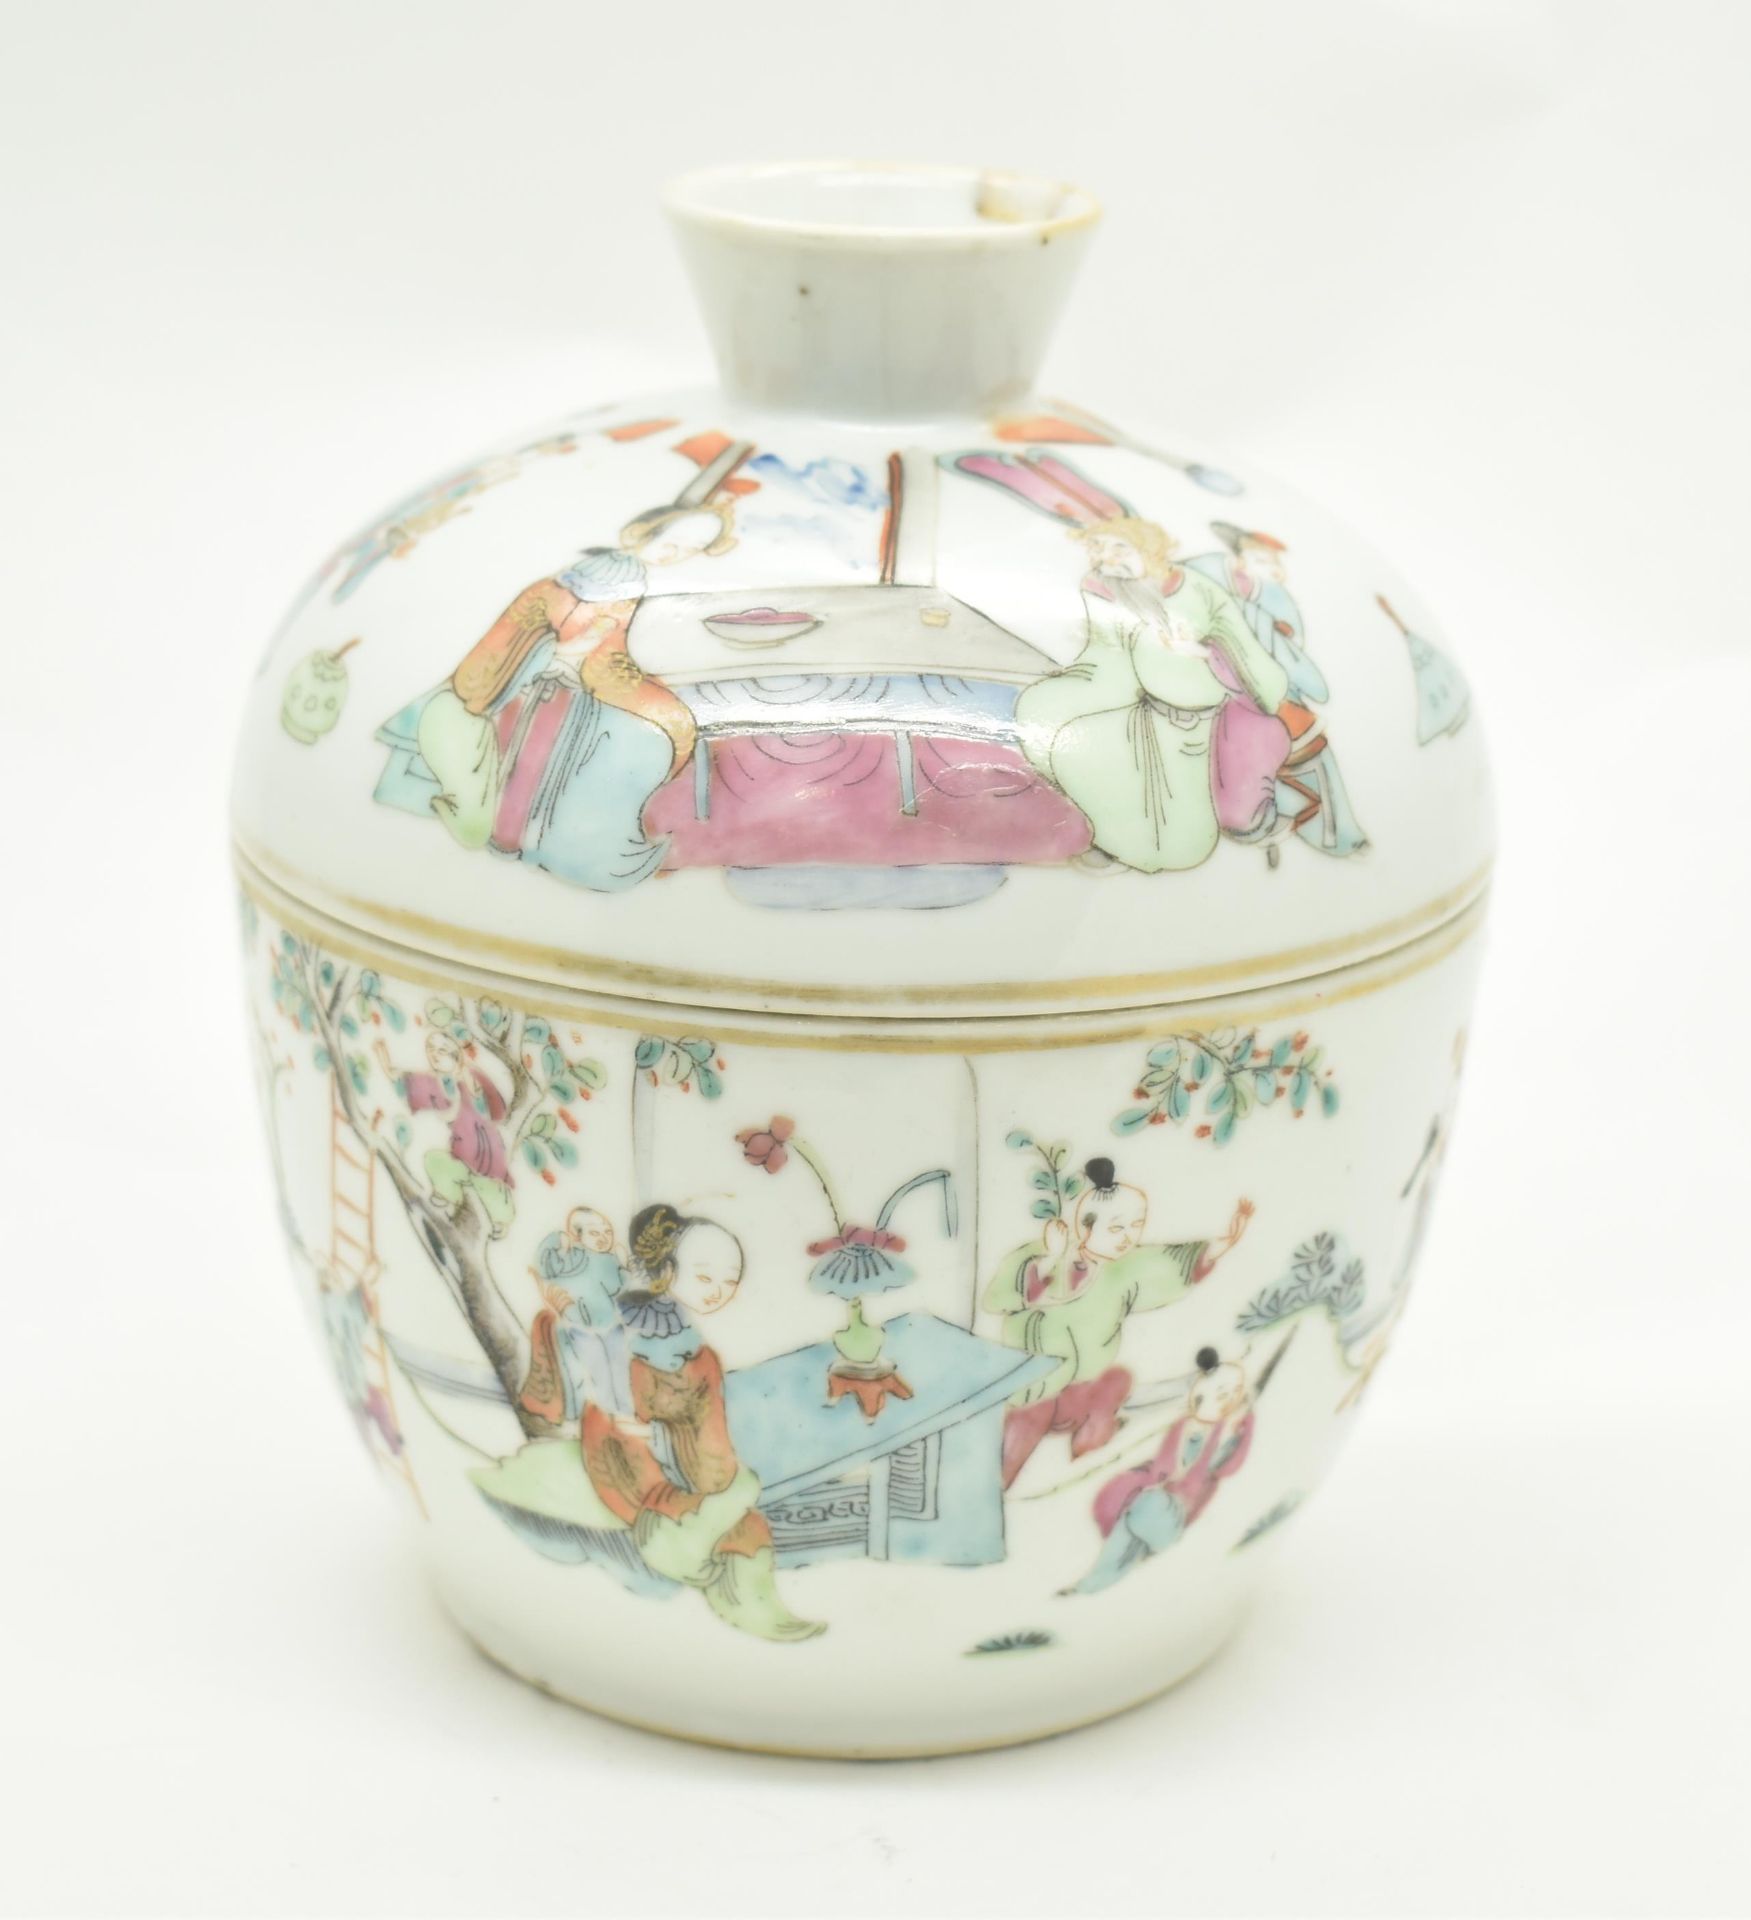 QING TONGZHI FAMILLE ROSE JAR WITH LID 清 同治粉彩盖罐